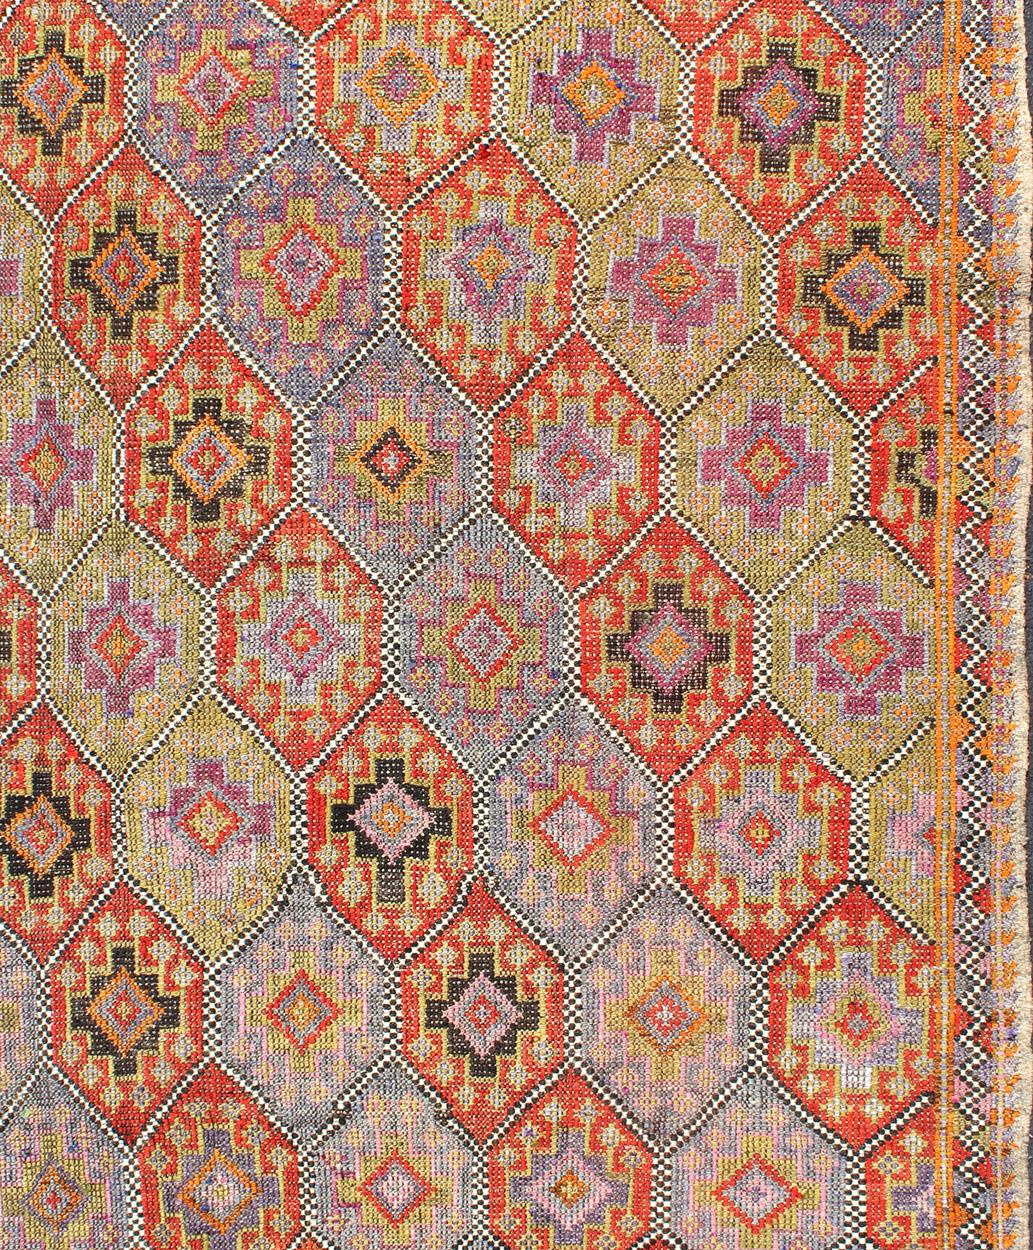  Vintage Turkish flat-weave with Tribal and Modern design with embroideries in multi colors, rug / TU-NED-551 Mid-20th Century Turkish Kilim

Measures: 5'7 x 8'11

 Rendered in diamond shapes with a spotted and speckled assortment of geometric